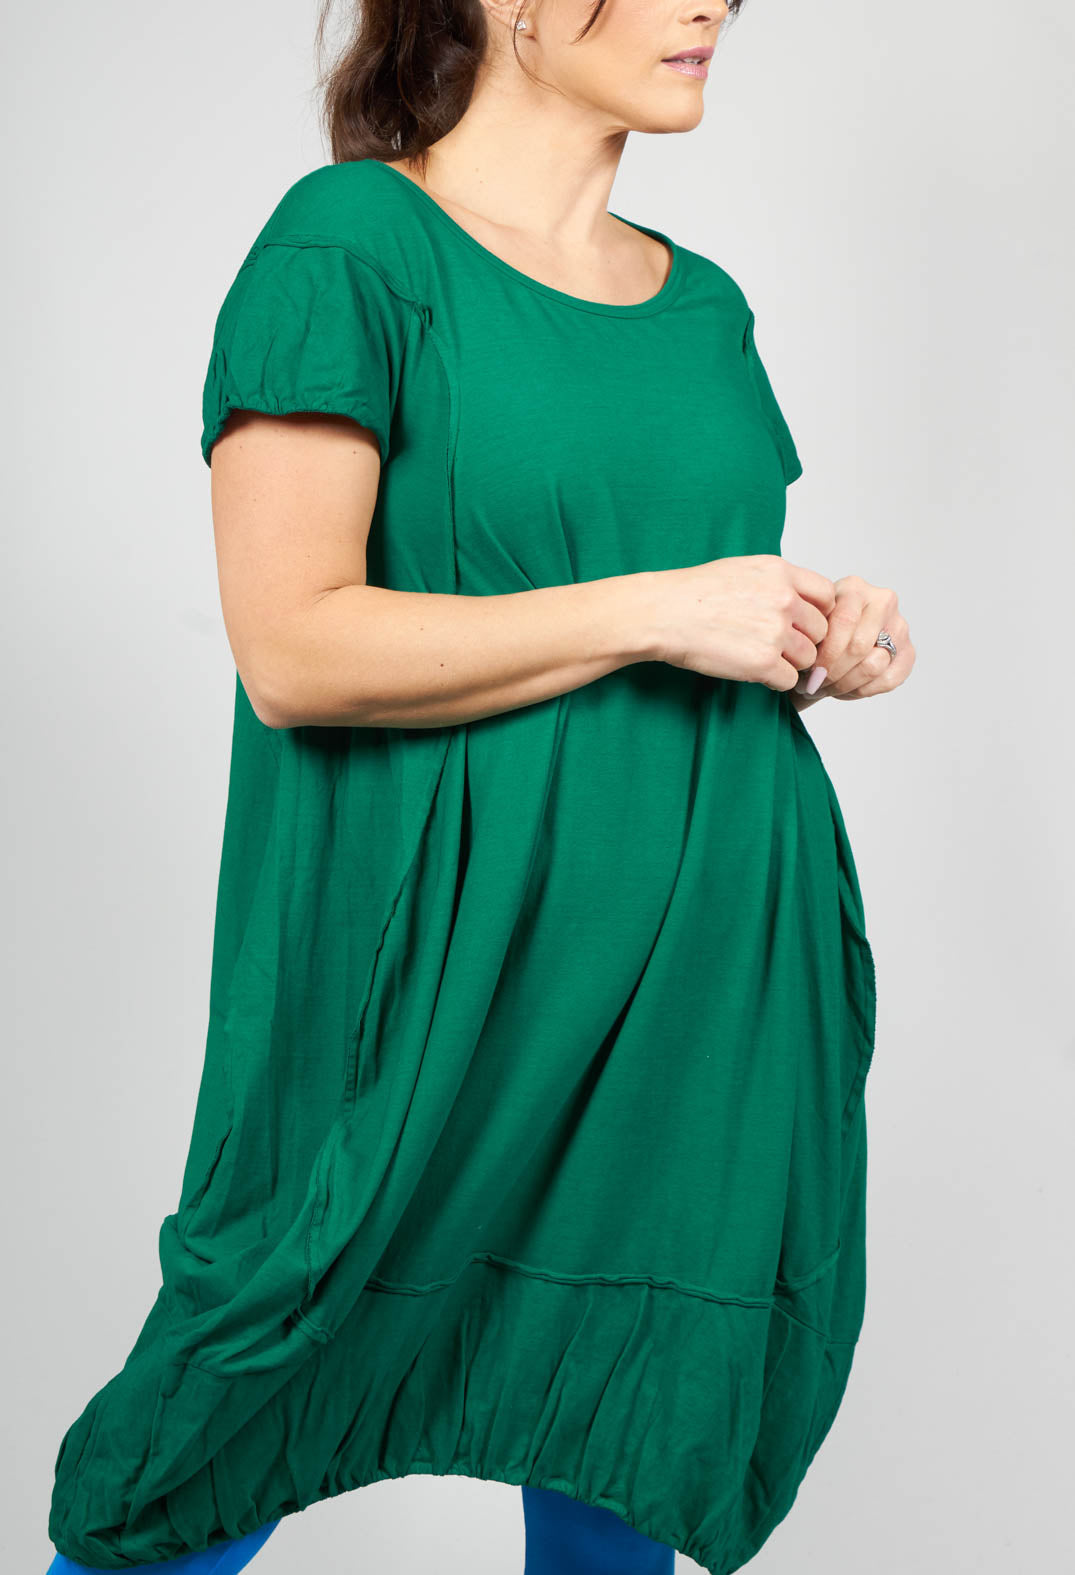 green jersey dress with short sleeves and gathered hem